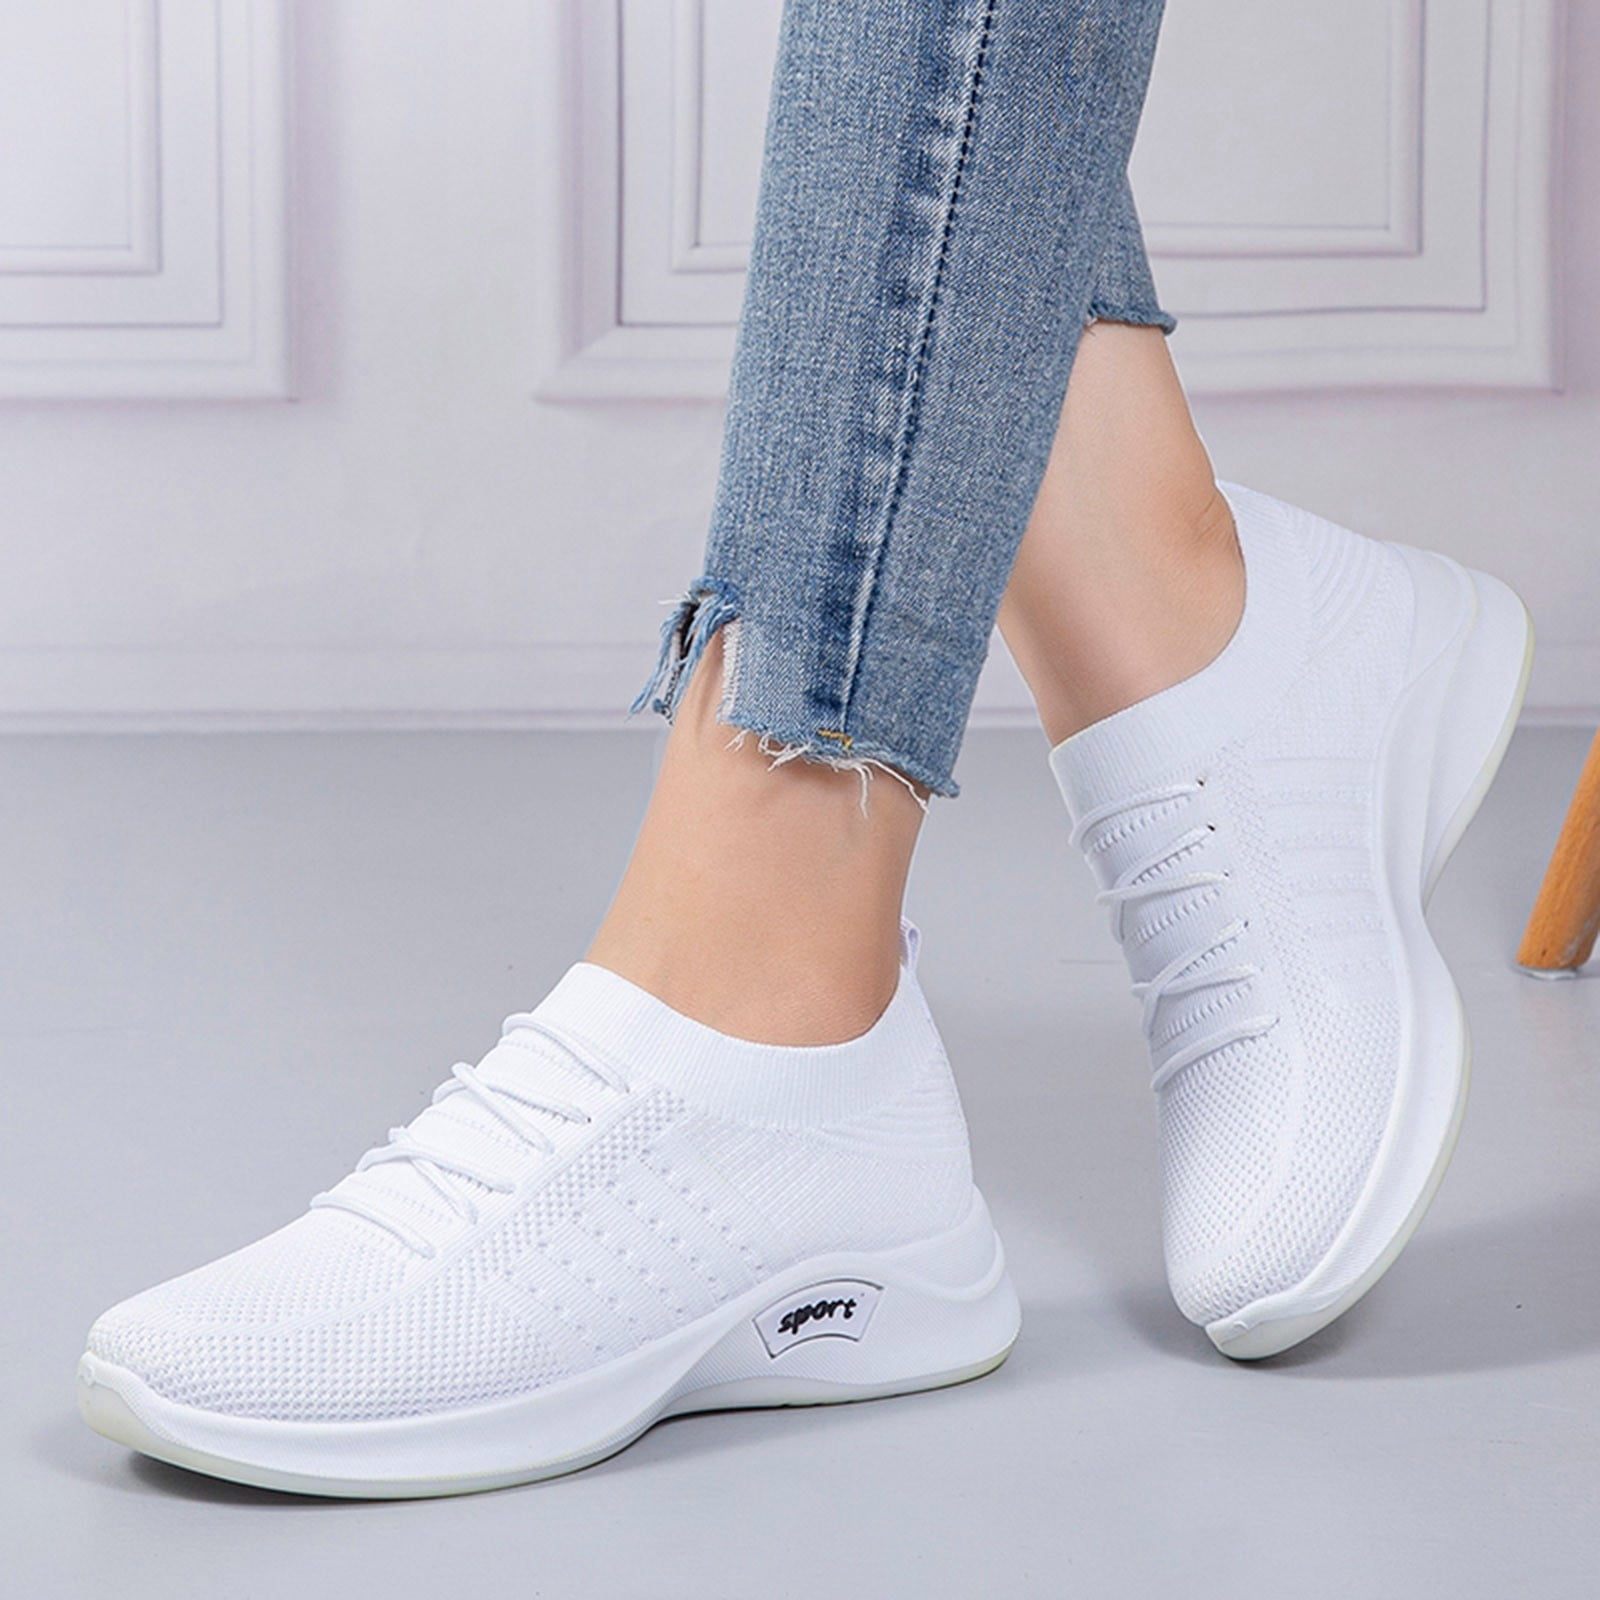 Ladies Shoes Fashion Casual Shoes Comfortable Lace Up Mesh Breathable  Casual Sneakers 